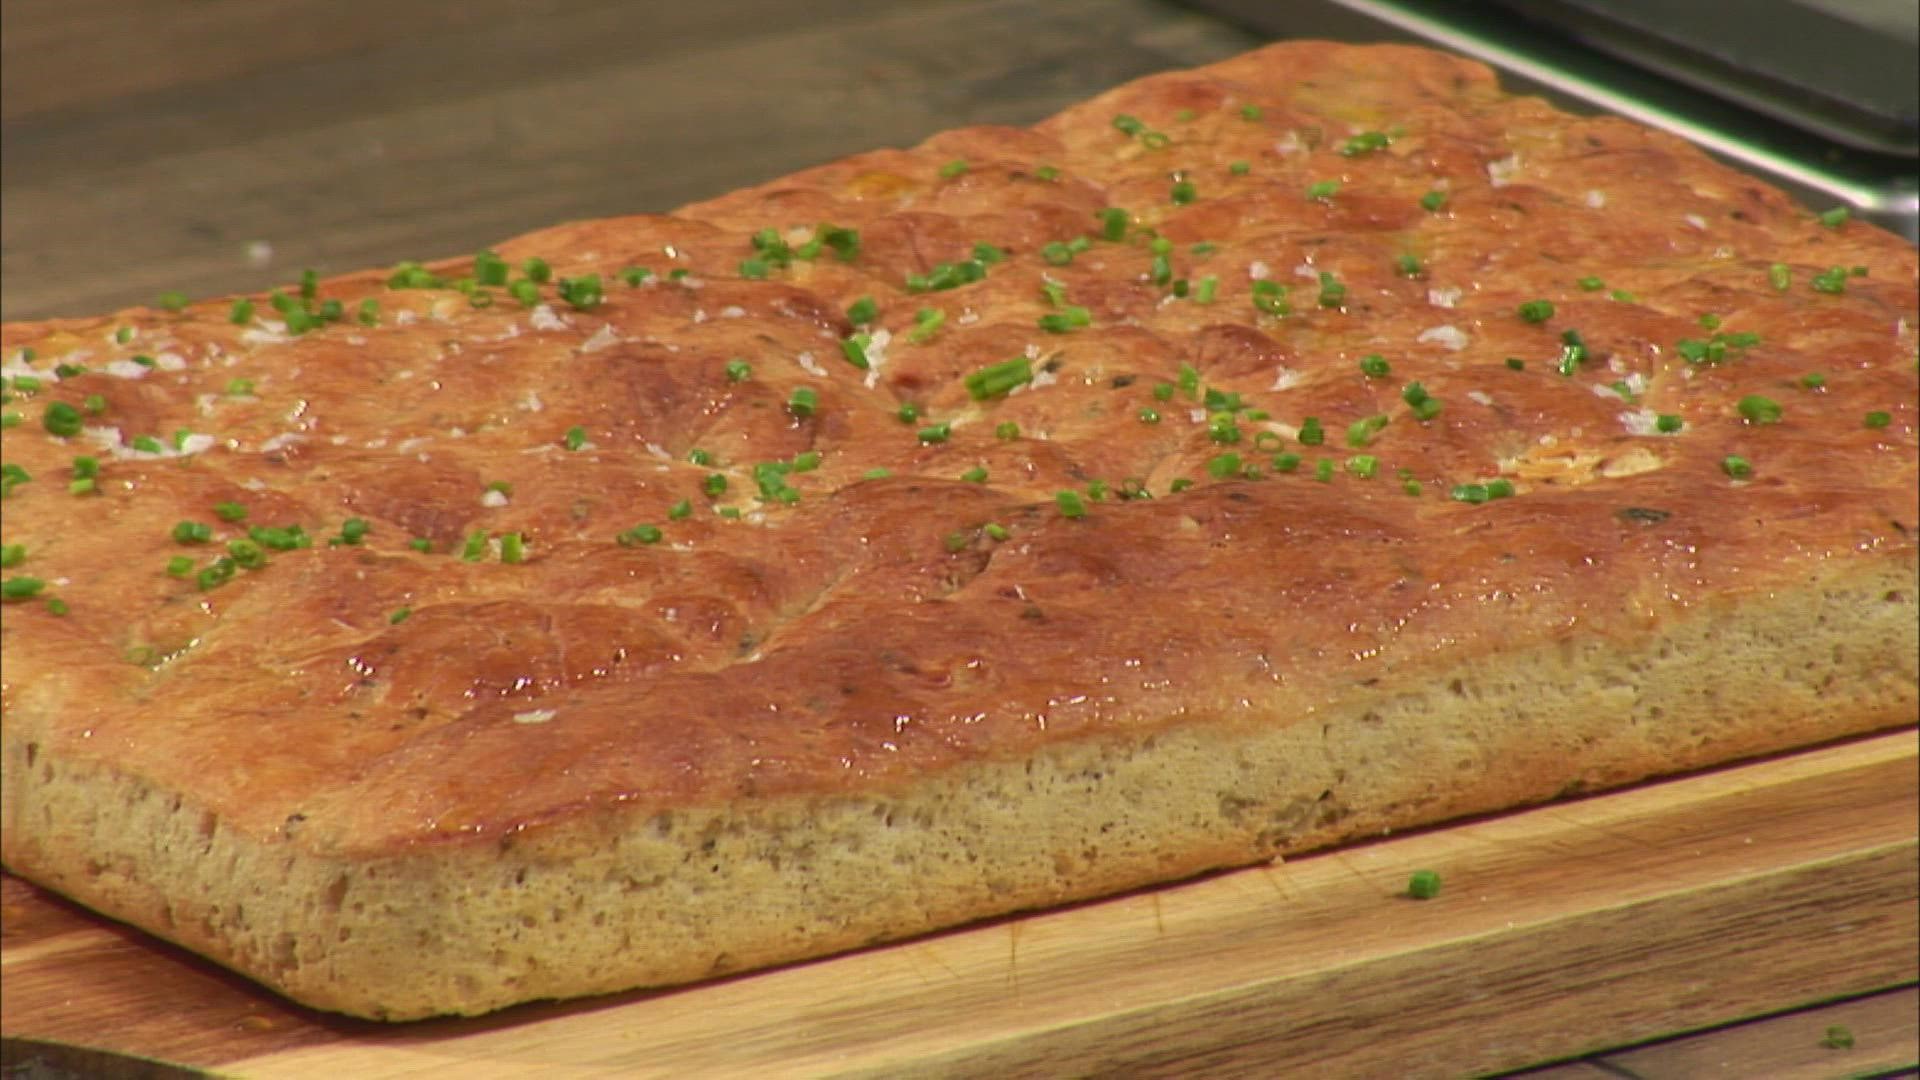 Dale Barnard shares his recipe for Focaccia bread that can be made in less than an hour.